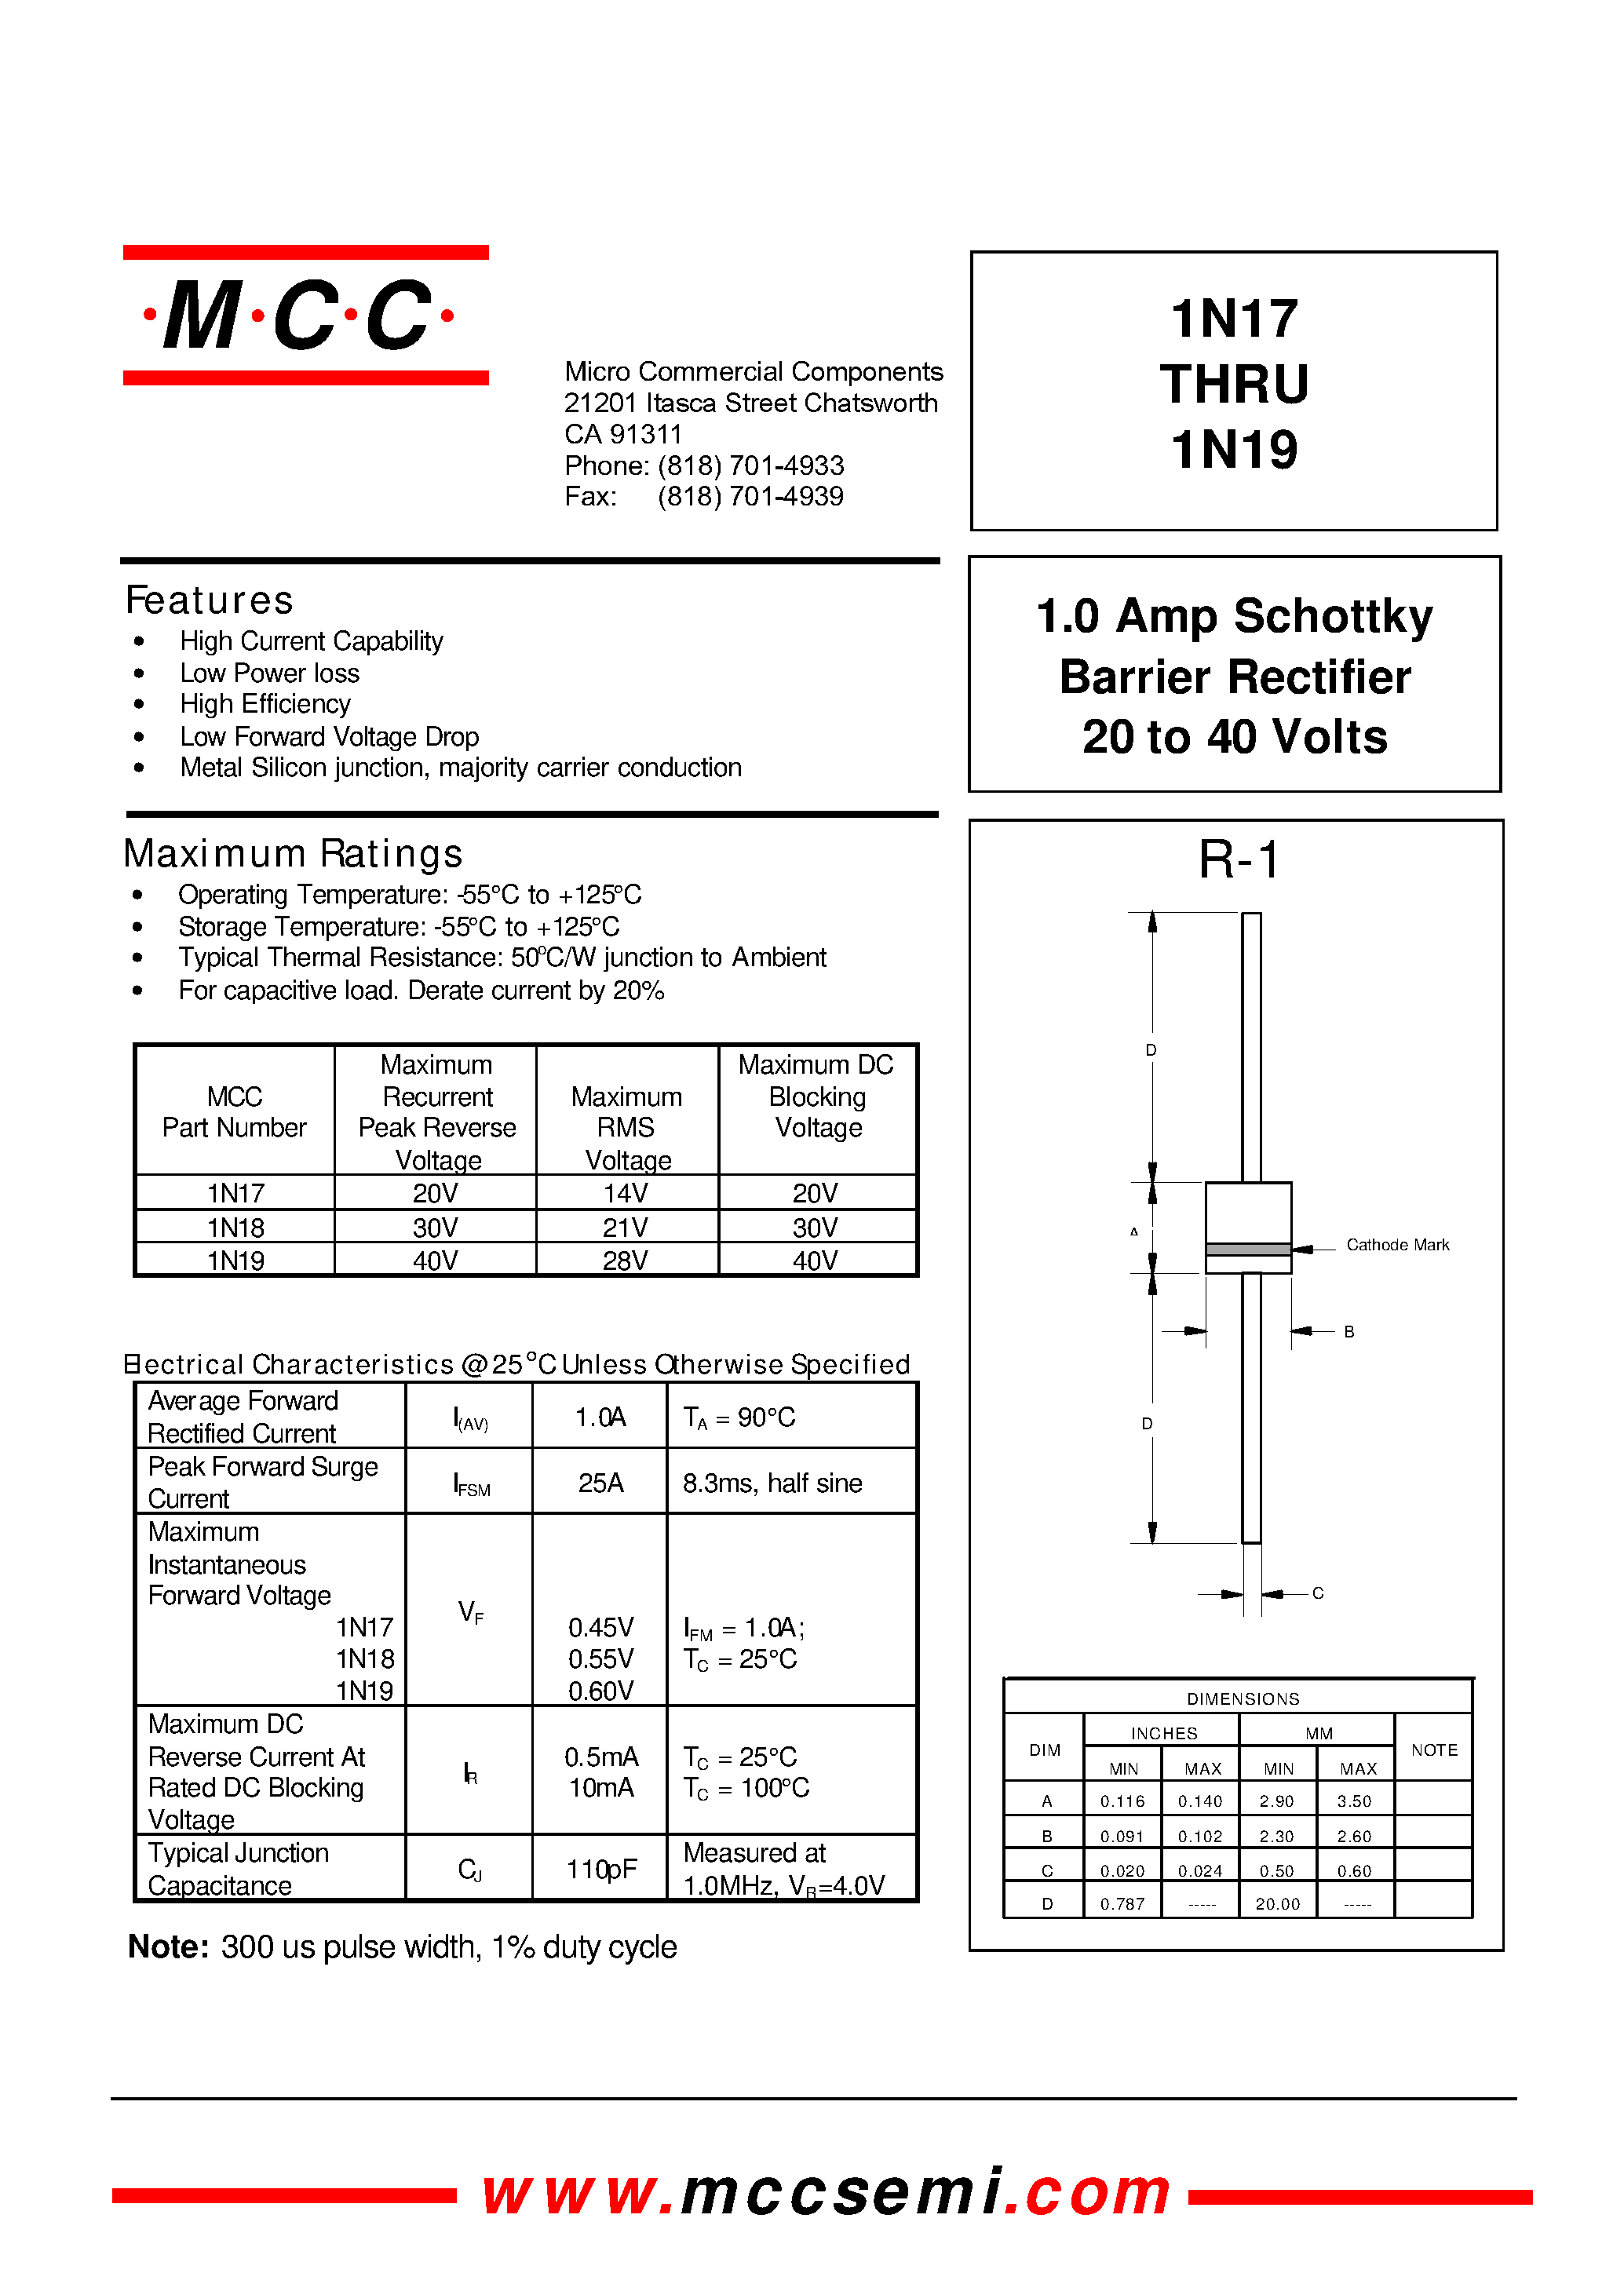 Datasheet 1N17 - 1.0 Amp Schottky Barrier Rectifier 20 to 40 Volts page 1